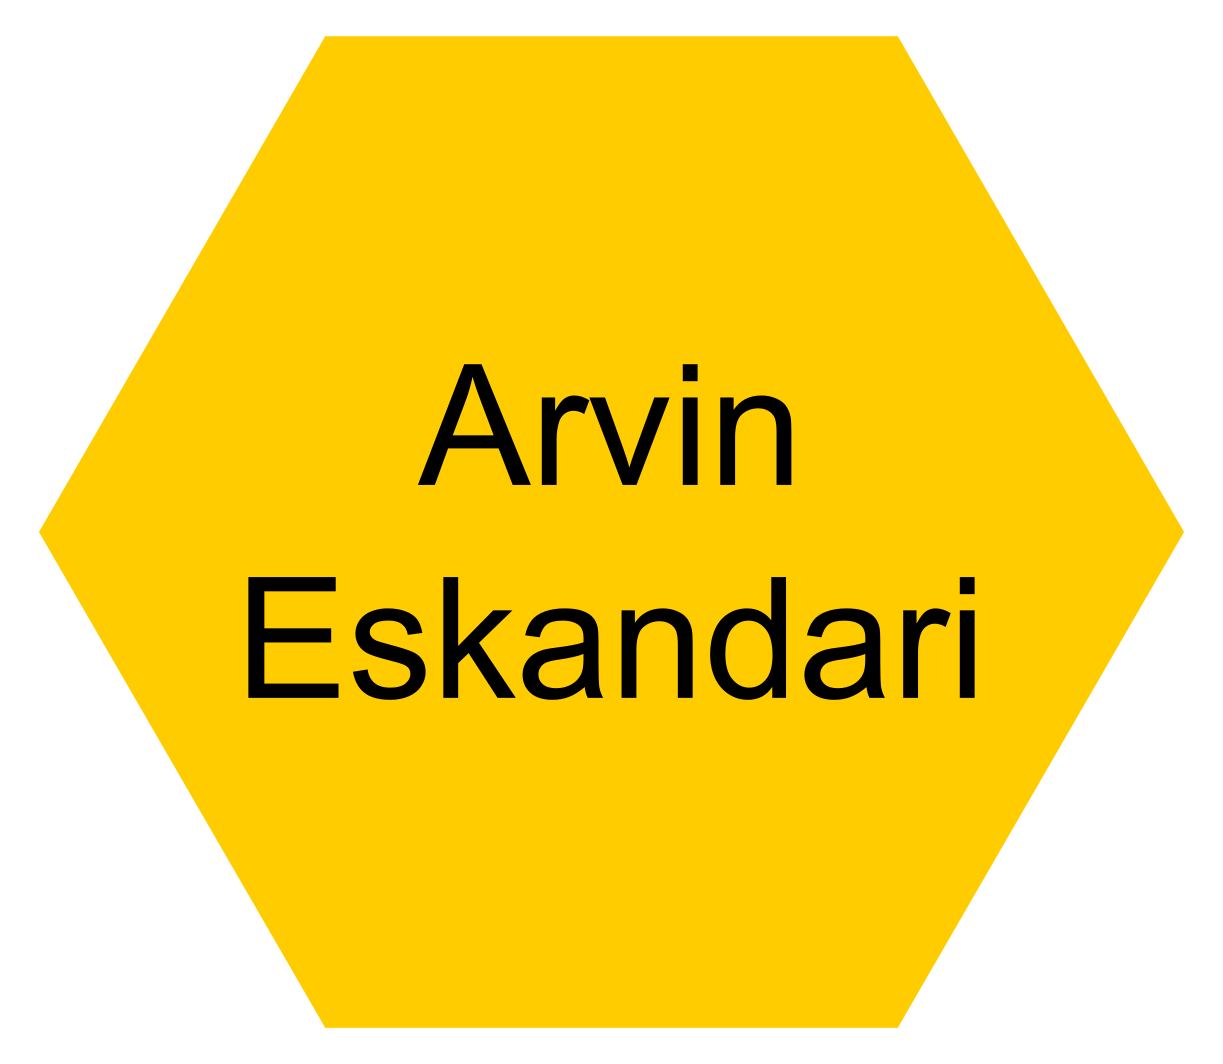 Dr. Arvin Eskandari (UCL School of Pharmacy: Post-Doctoral Researcher) - Click this icon to reveal their contact details.